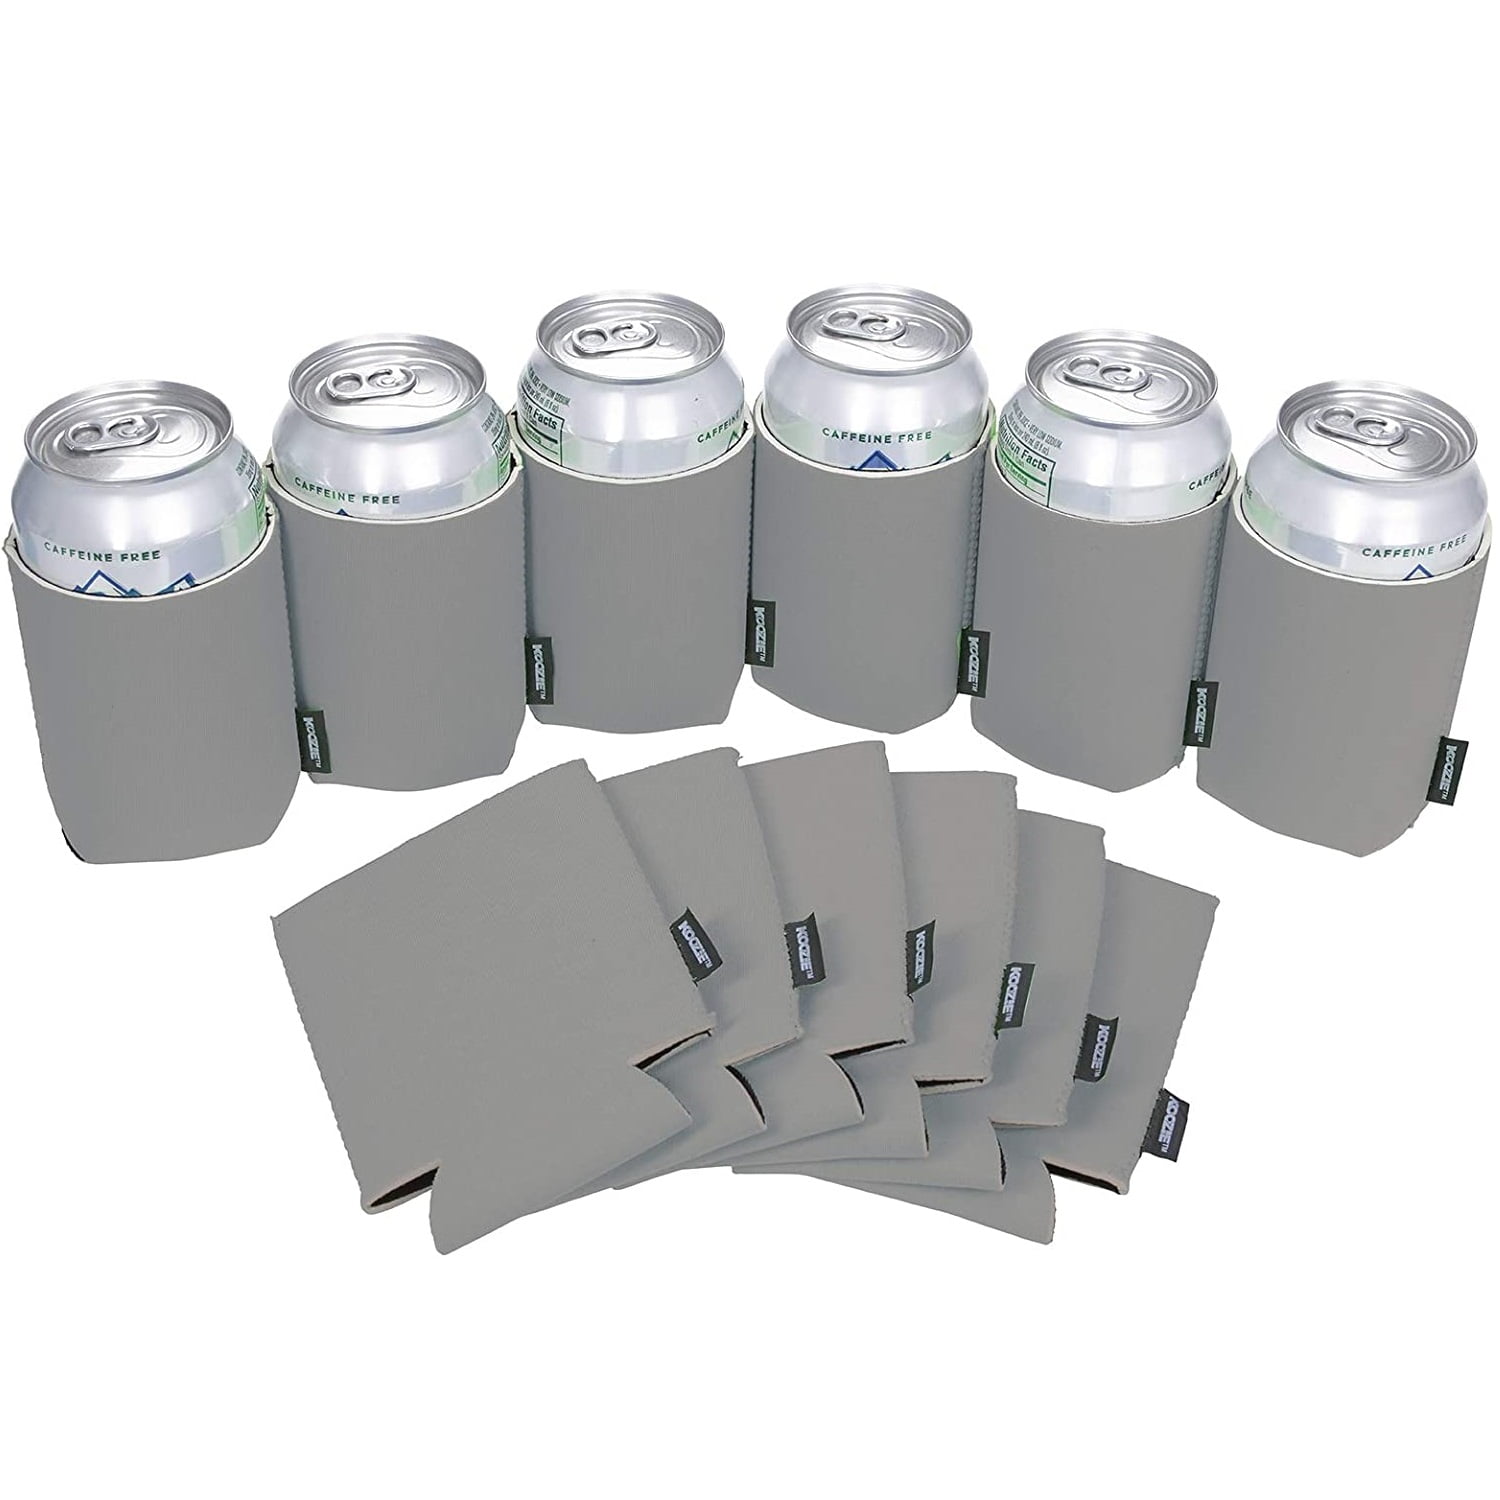 KOOZIE 25 Pack Blank Beer Can Coolers - Bulk Insulated Drink